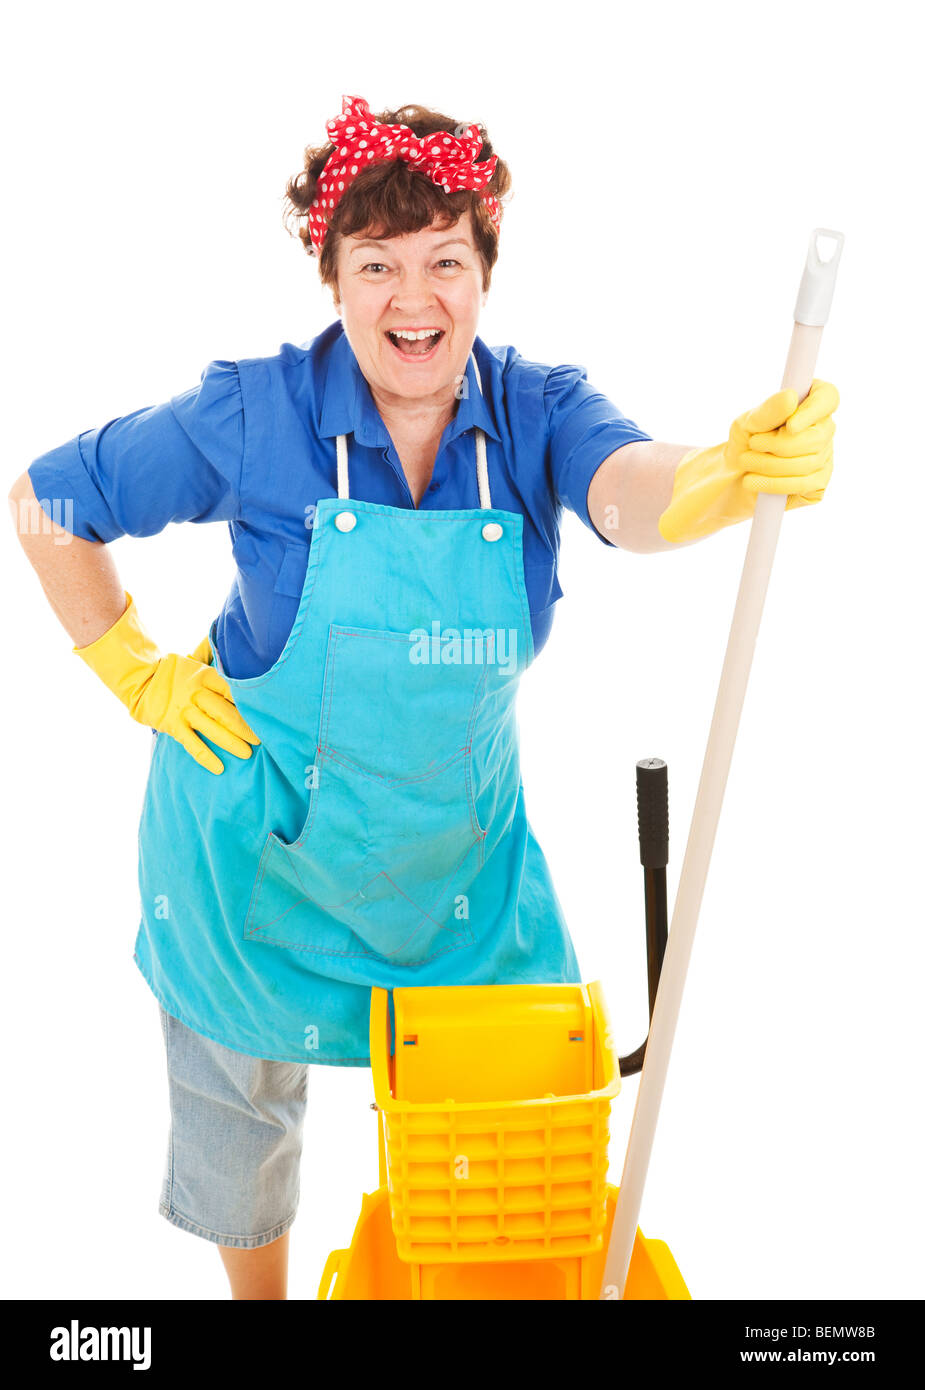 Friendly, smiling maid getting ready to mop the floor. Isolated on ...